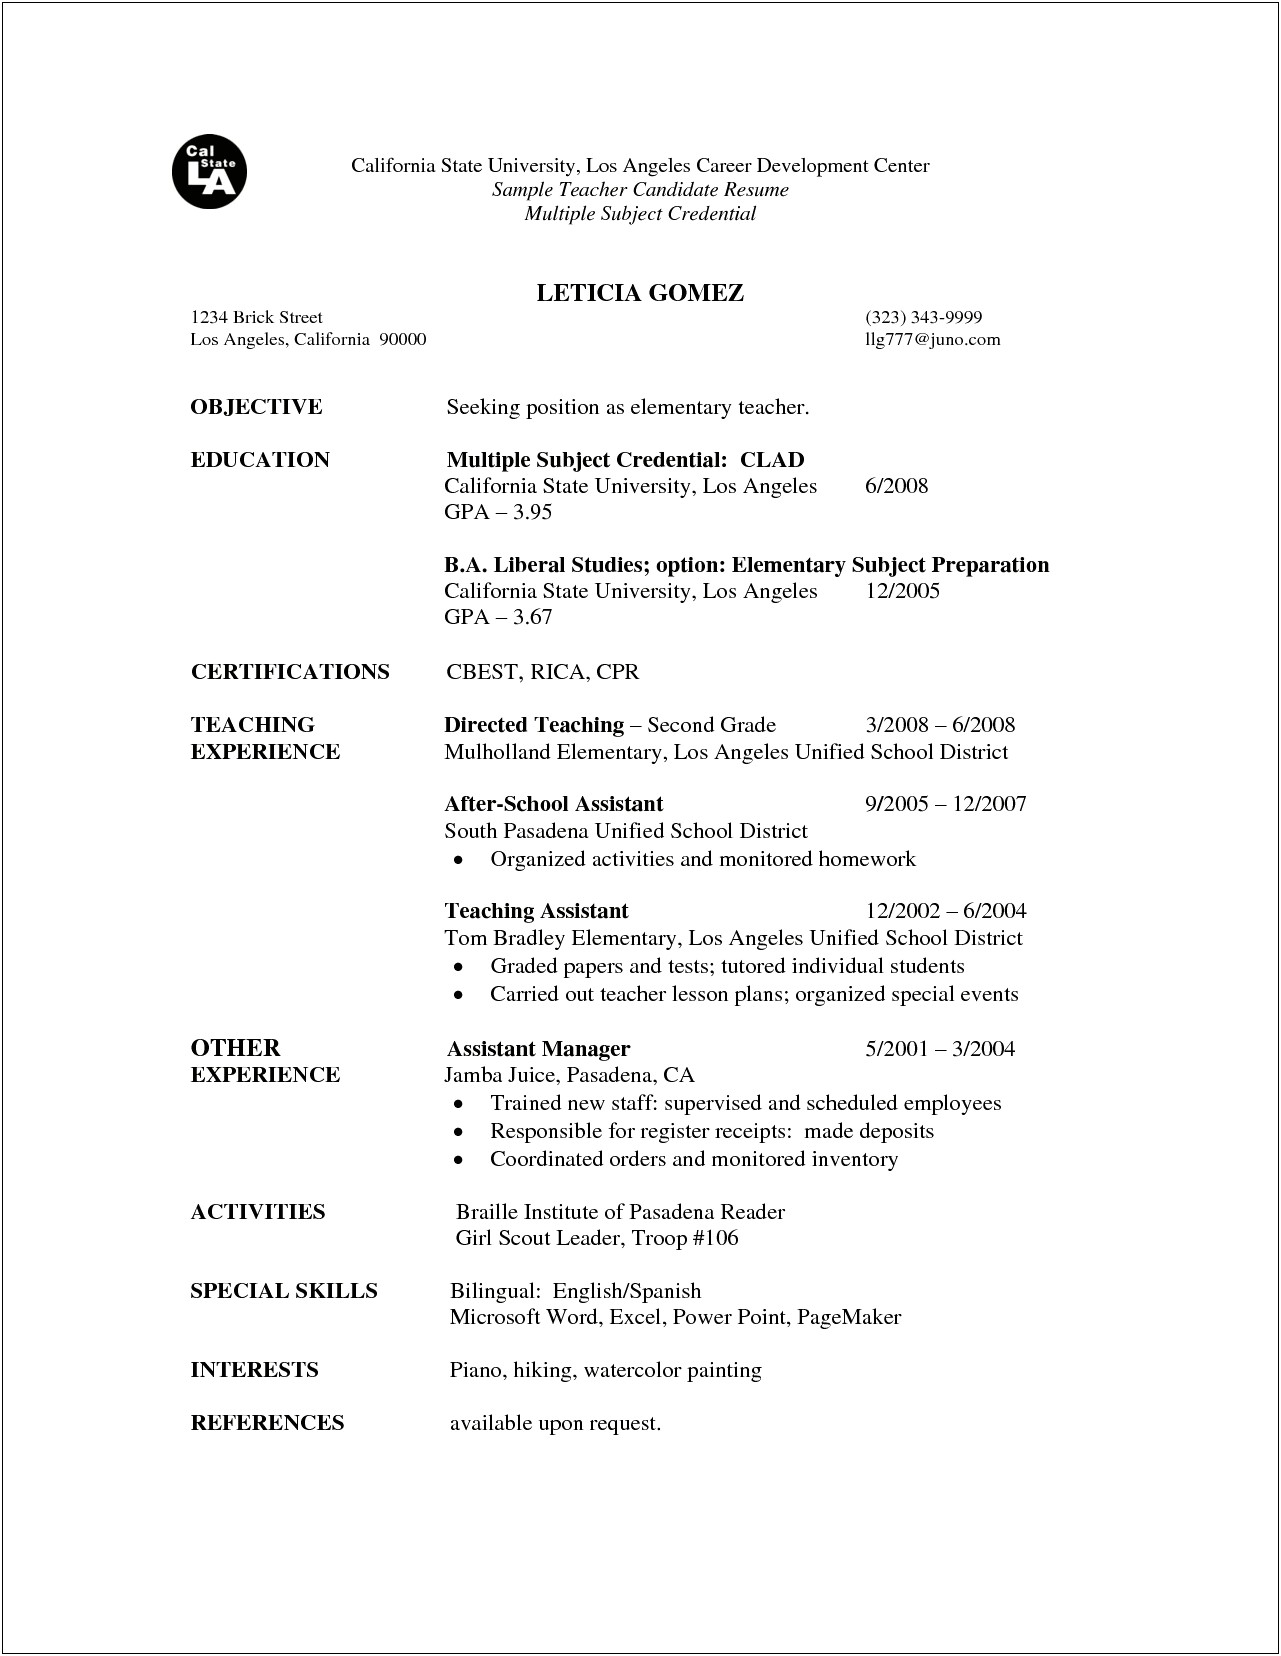 Free Examples Of Elementary Teacher Resumes